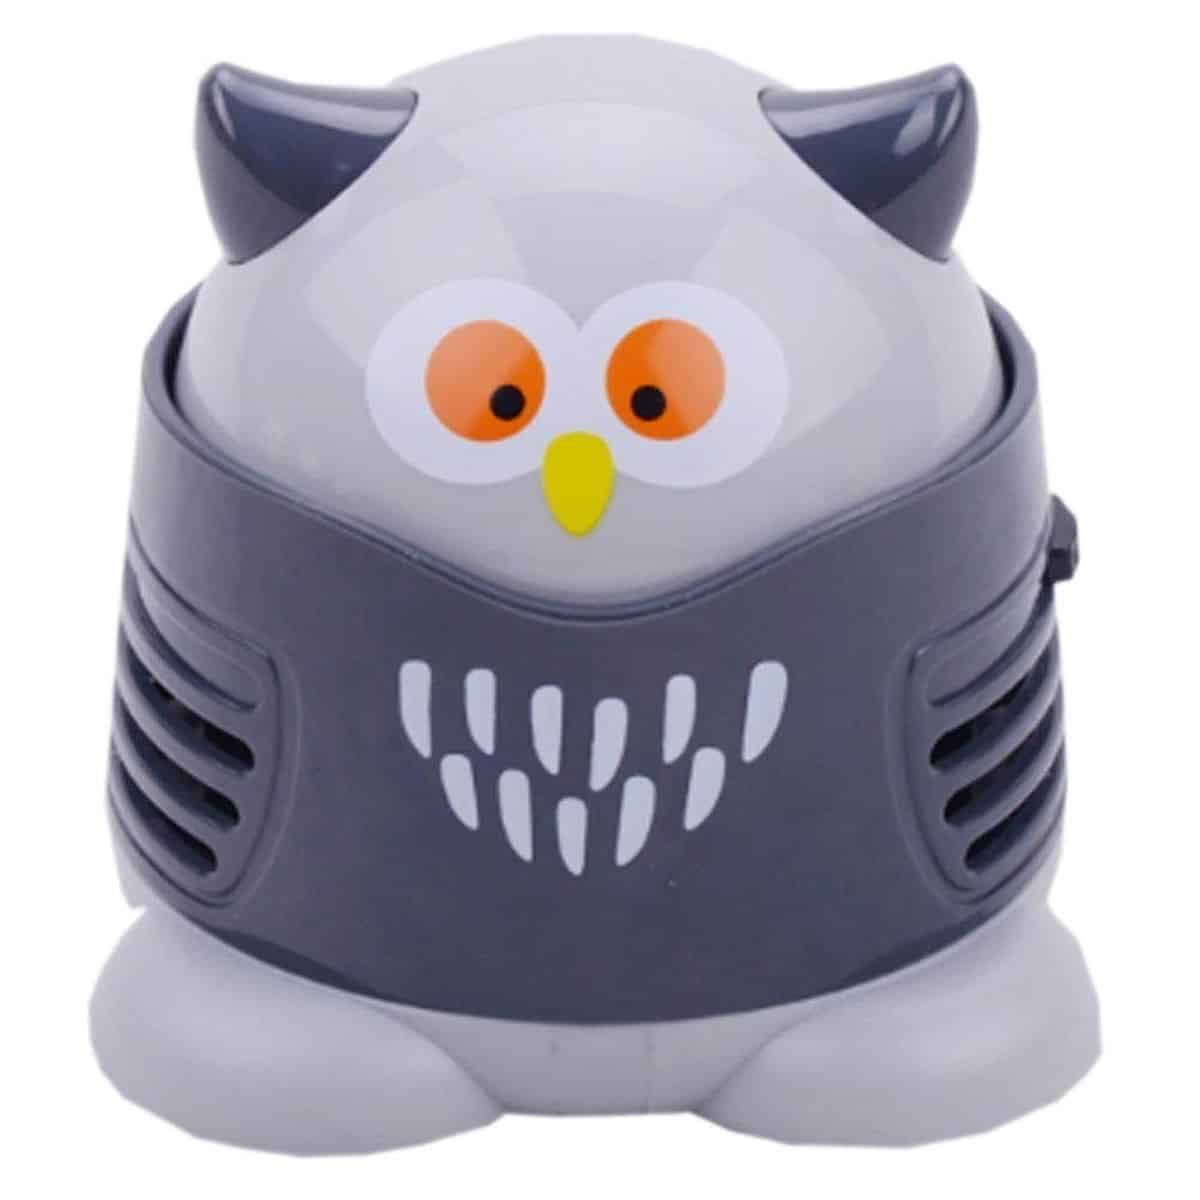 Portable Cartoon Mini Owl table Dust Vacuum Cleaner | Top Gadgets To Speed Up Your Spring Cleaning